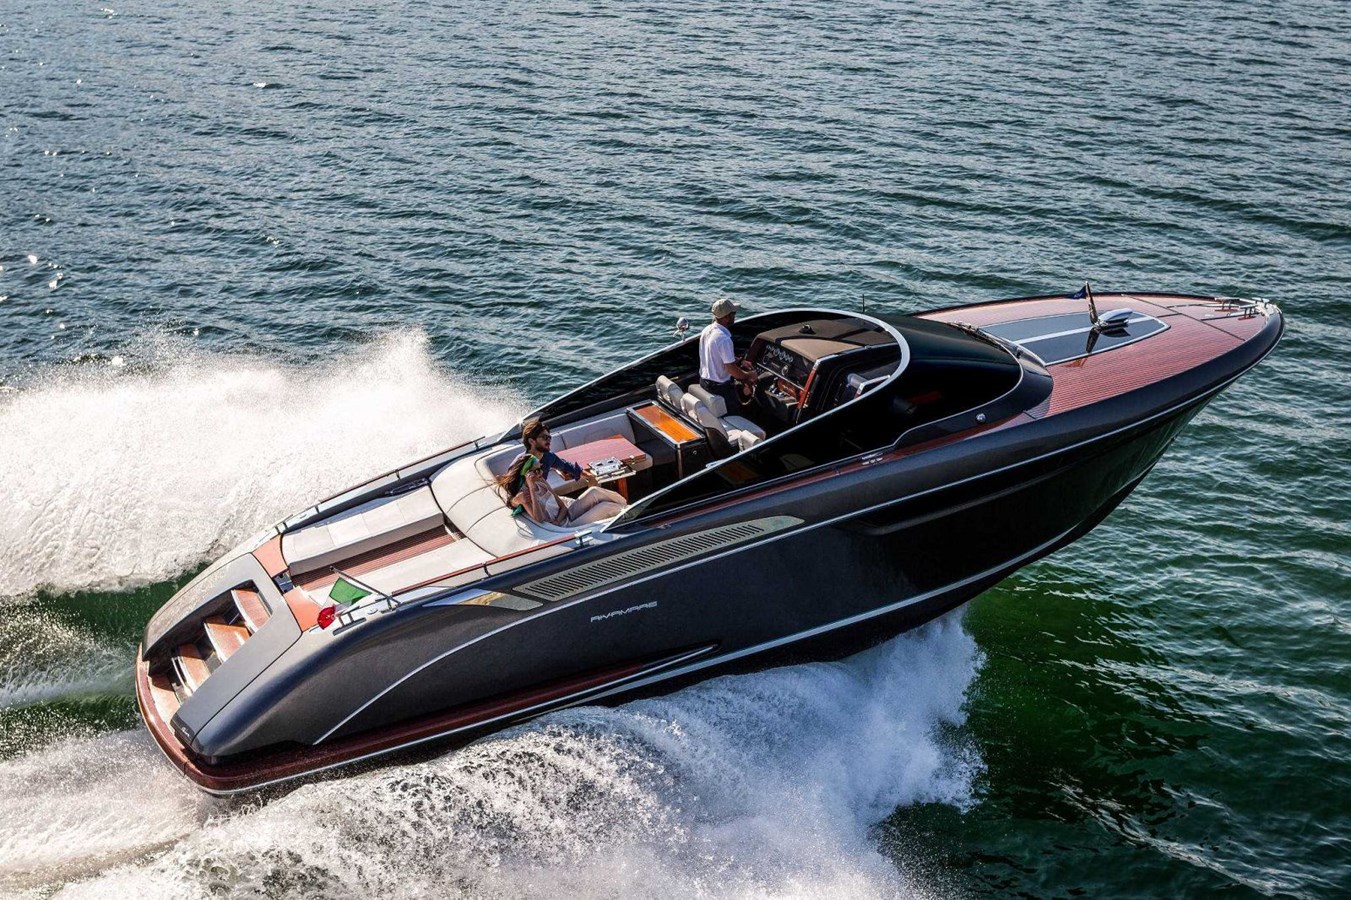 RIVA 38 RIVAMARE charter specs and number of guests